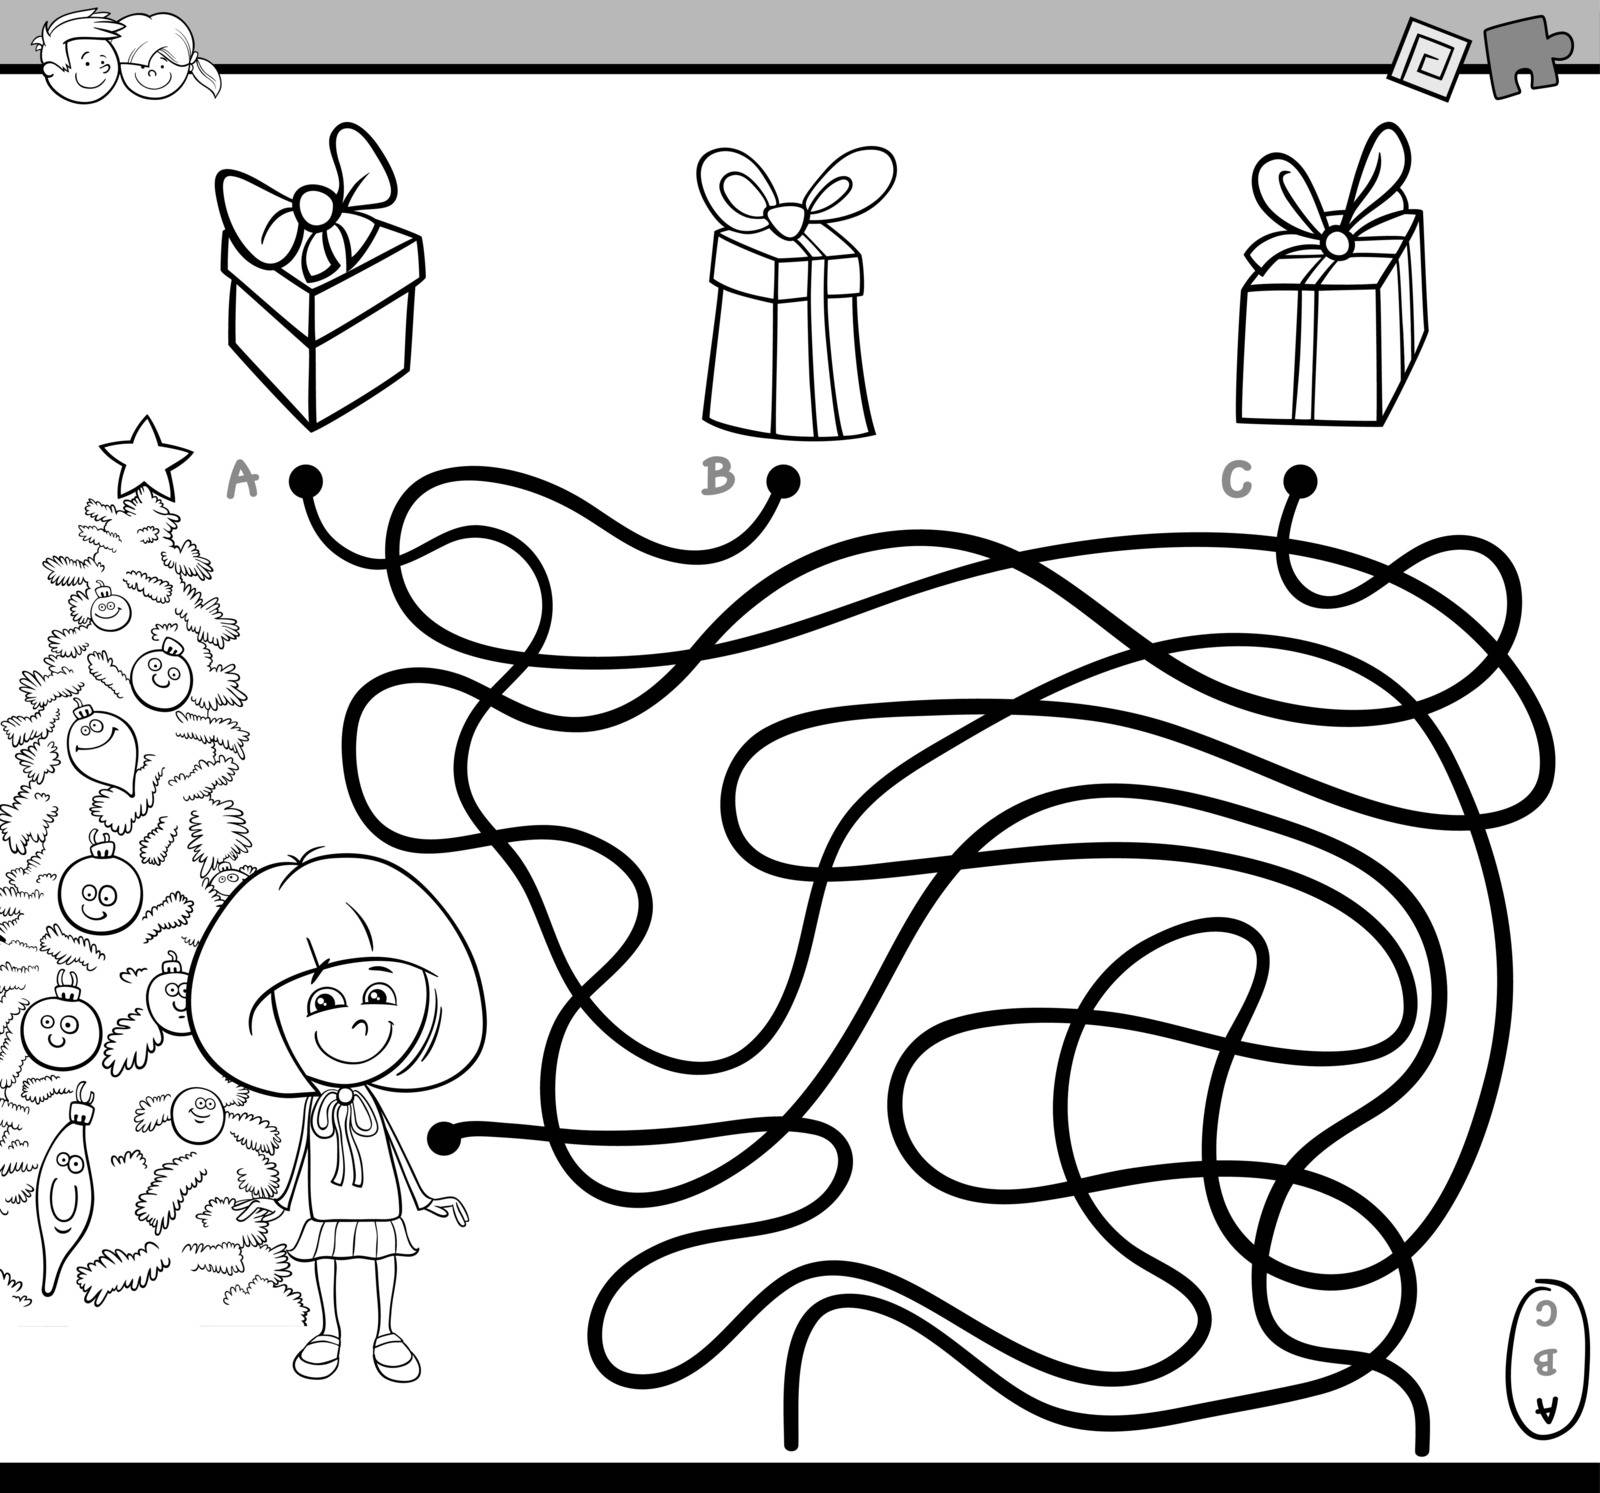 Black and White Cartoon Illustration of Educational Paths or Maze Puzzle Activity with Little Girl and Christmas Presents Coloring Book